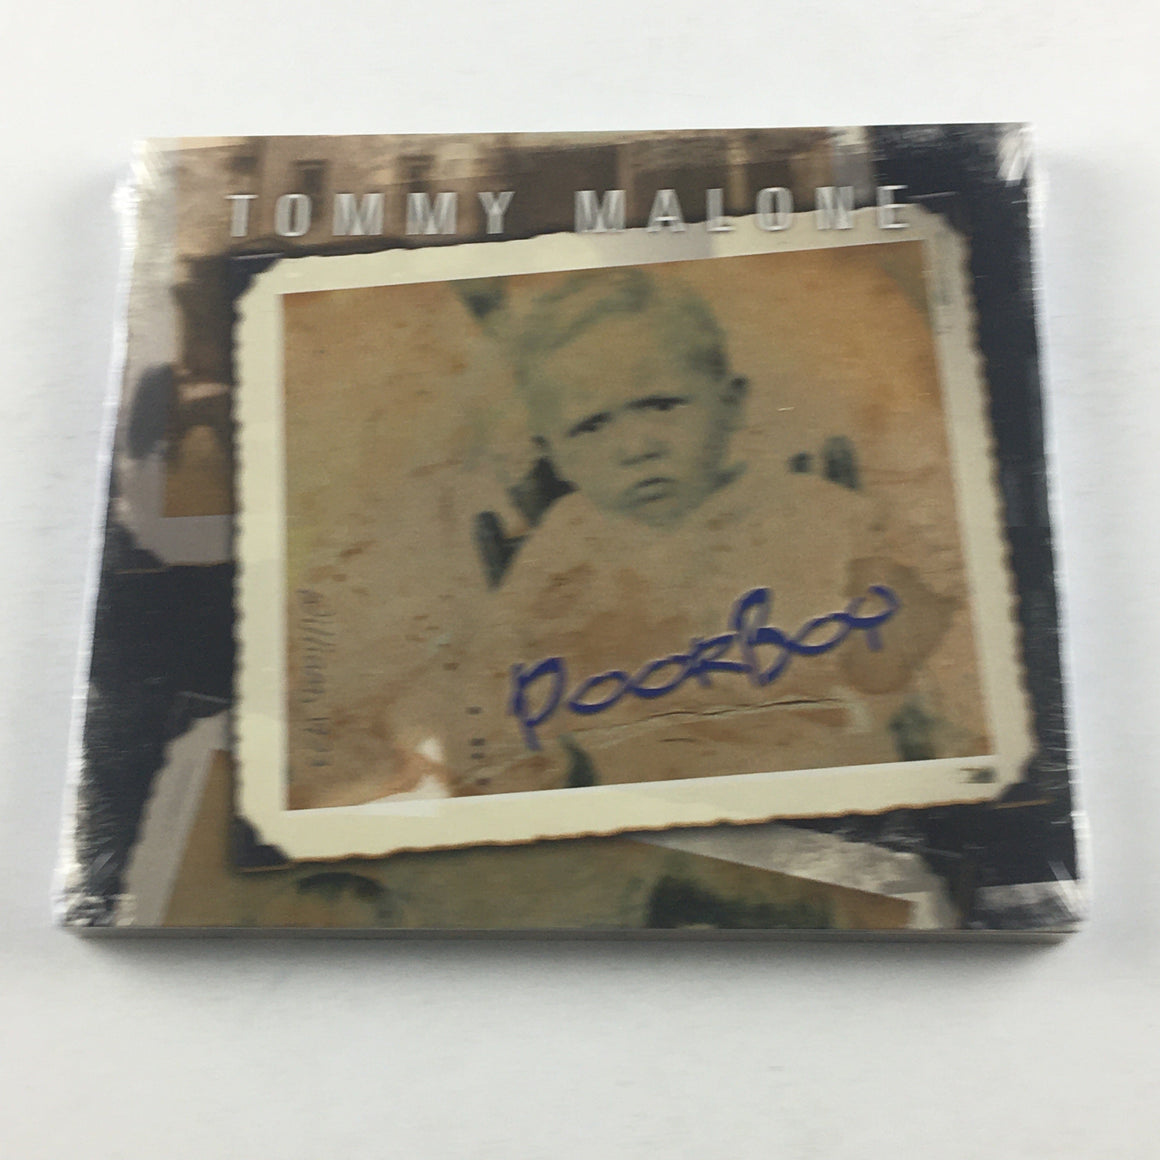 Tommy Malone Poor Boy New Sealed CD M\M